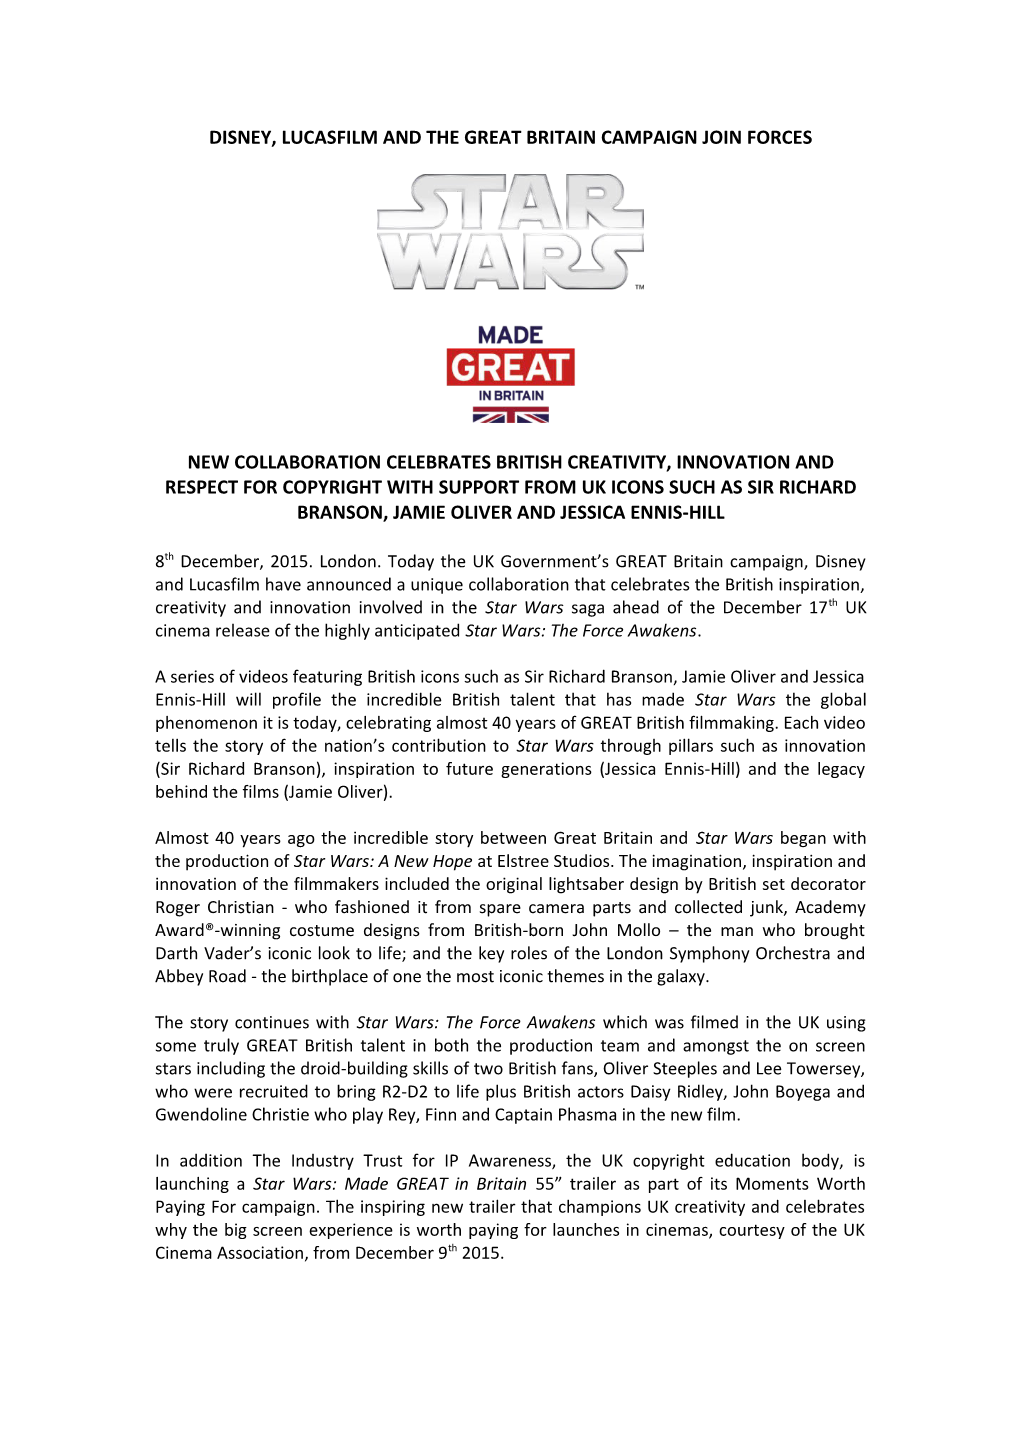 Disney, Lucasfilm and the Great Britain Campaign Join Forces